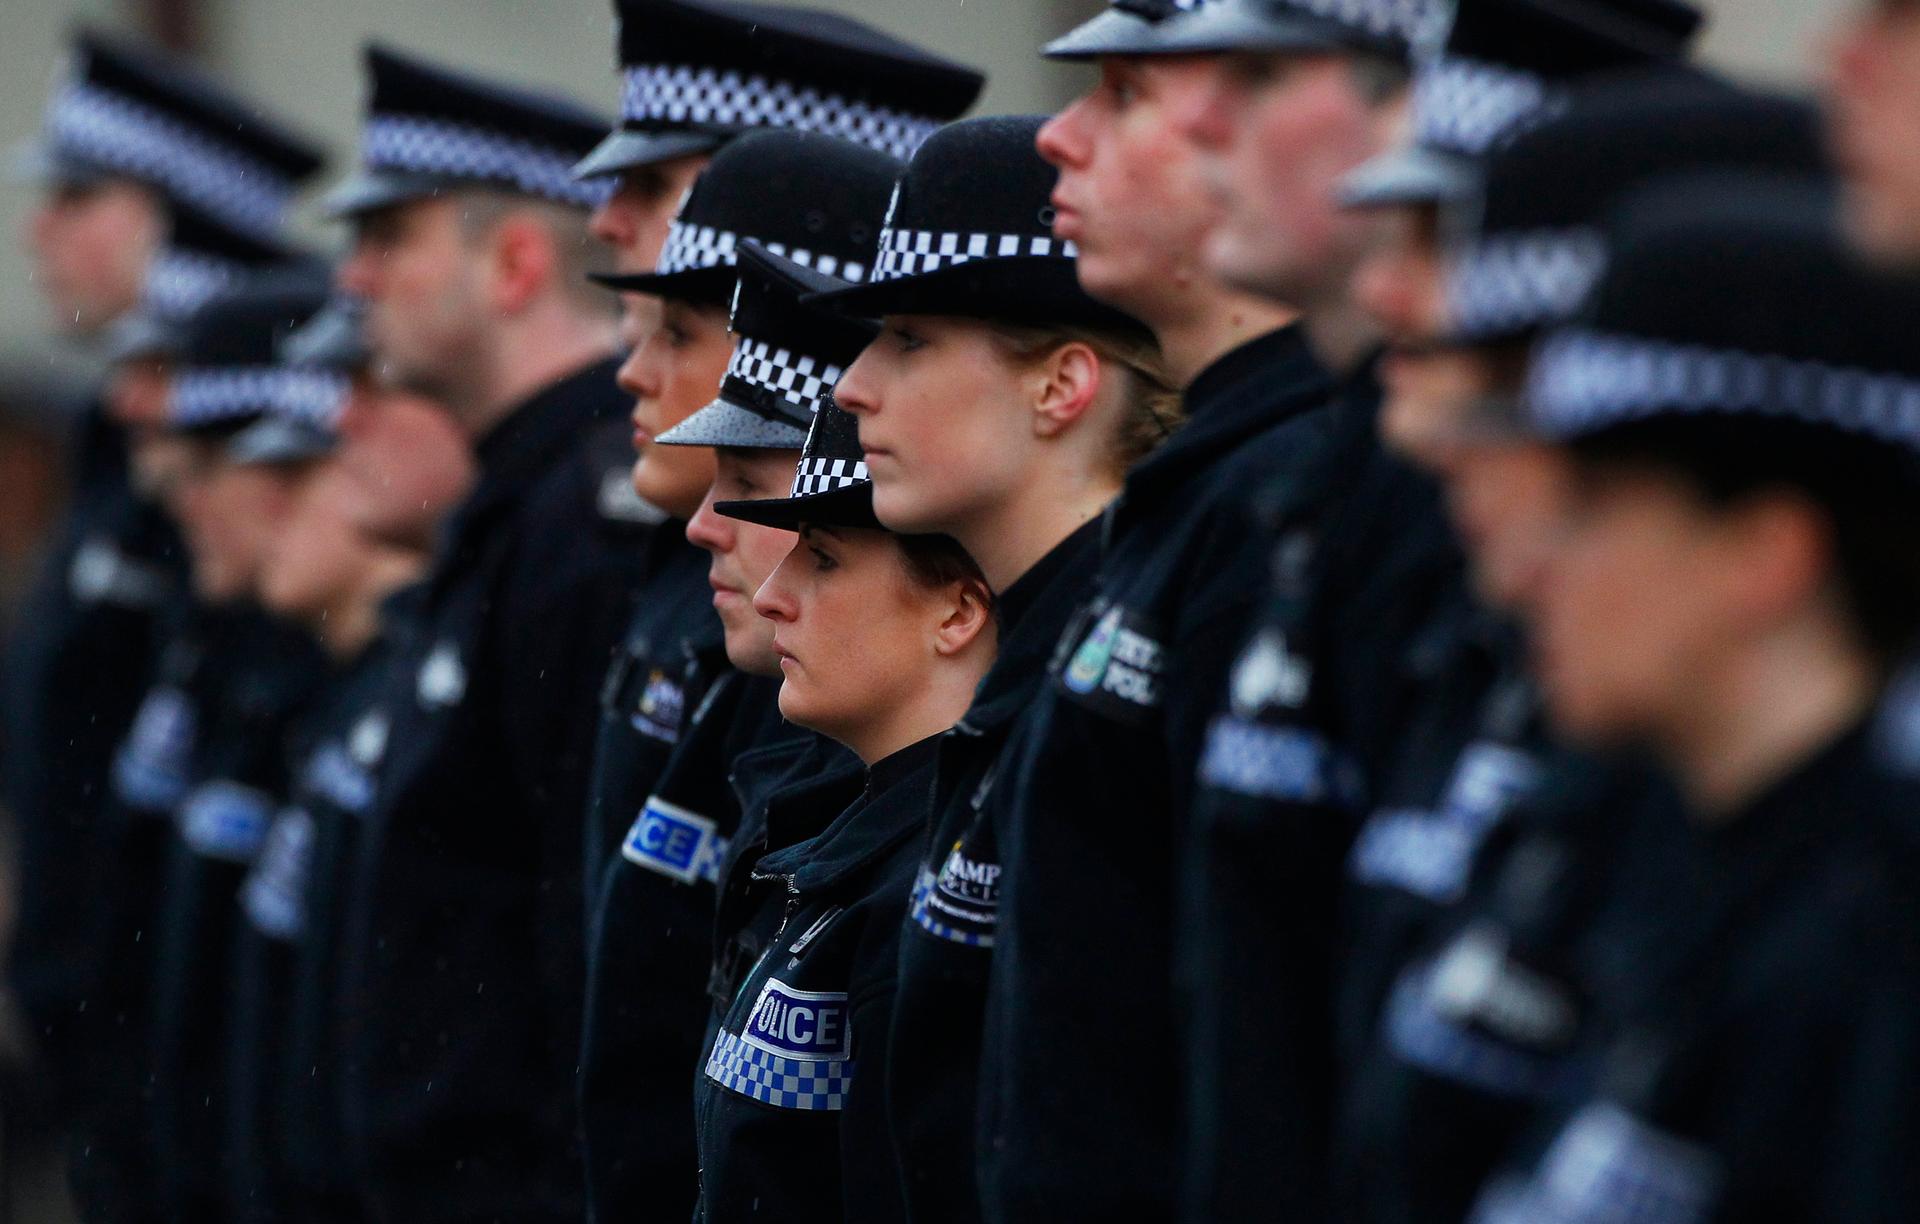 Police recruits stand to attention during their passing out parade at the Scottish Police College in Tulliallan, Scotland March 8, 2013.